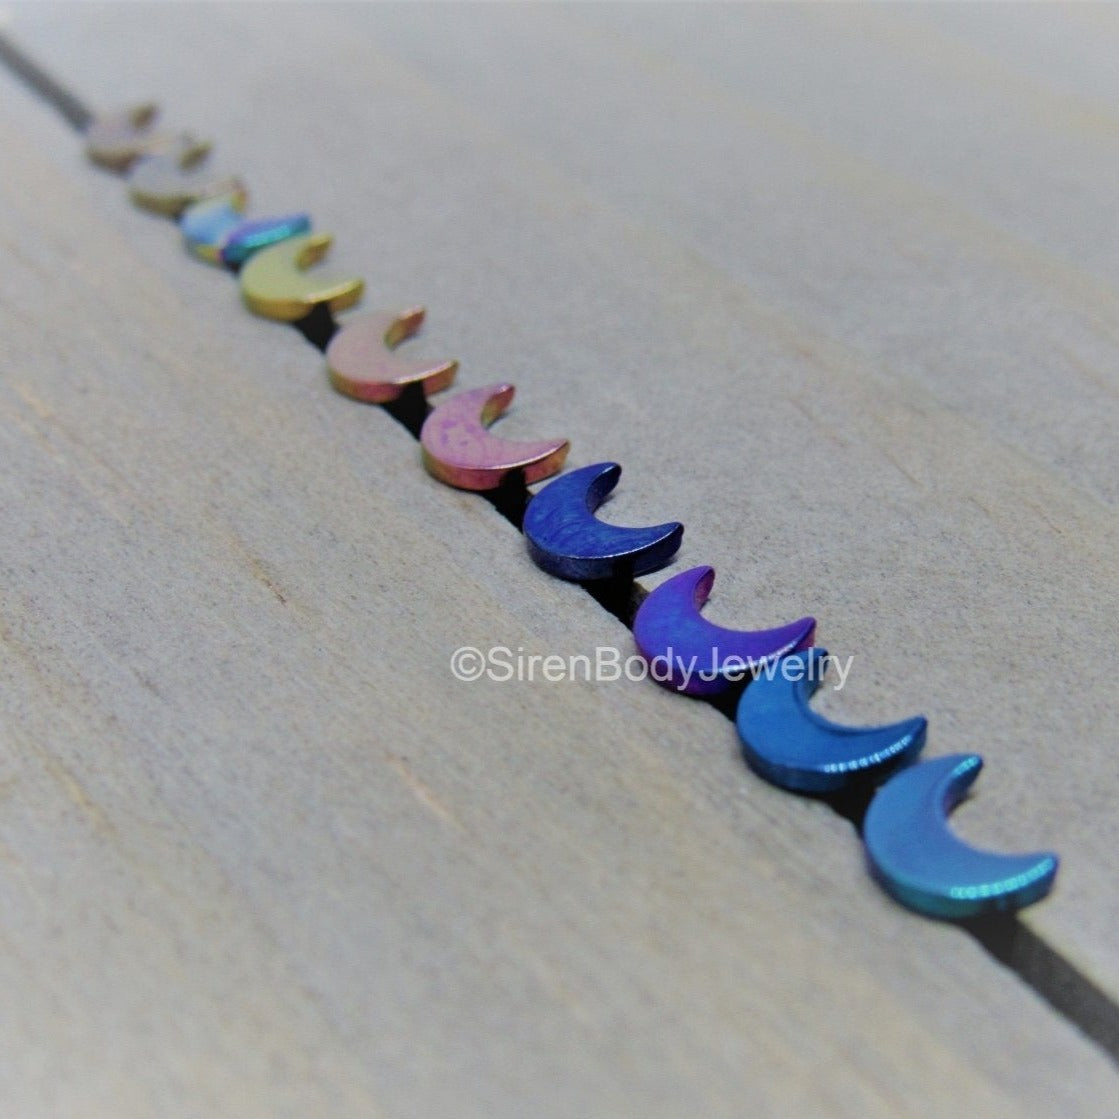 16g titanium anodized crescent moon flat back earring stud helix cartilage earring jewelry